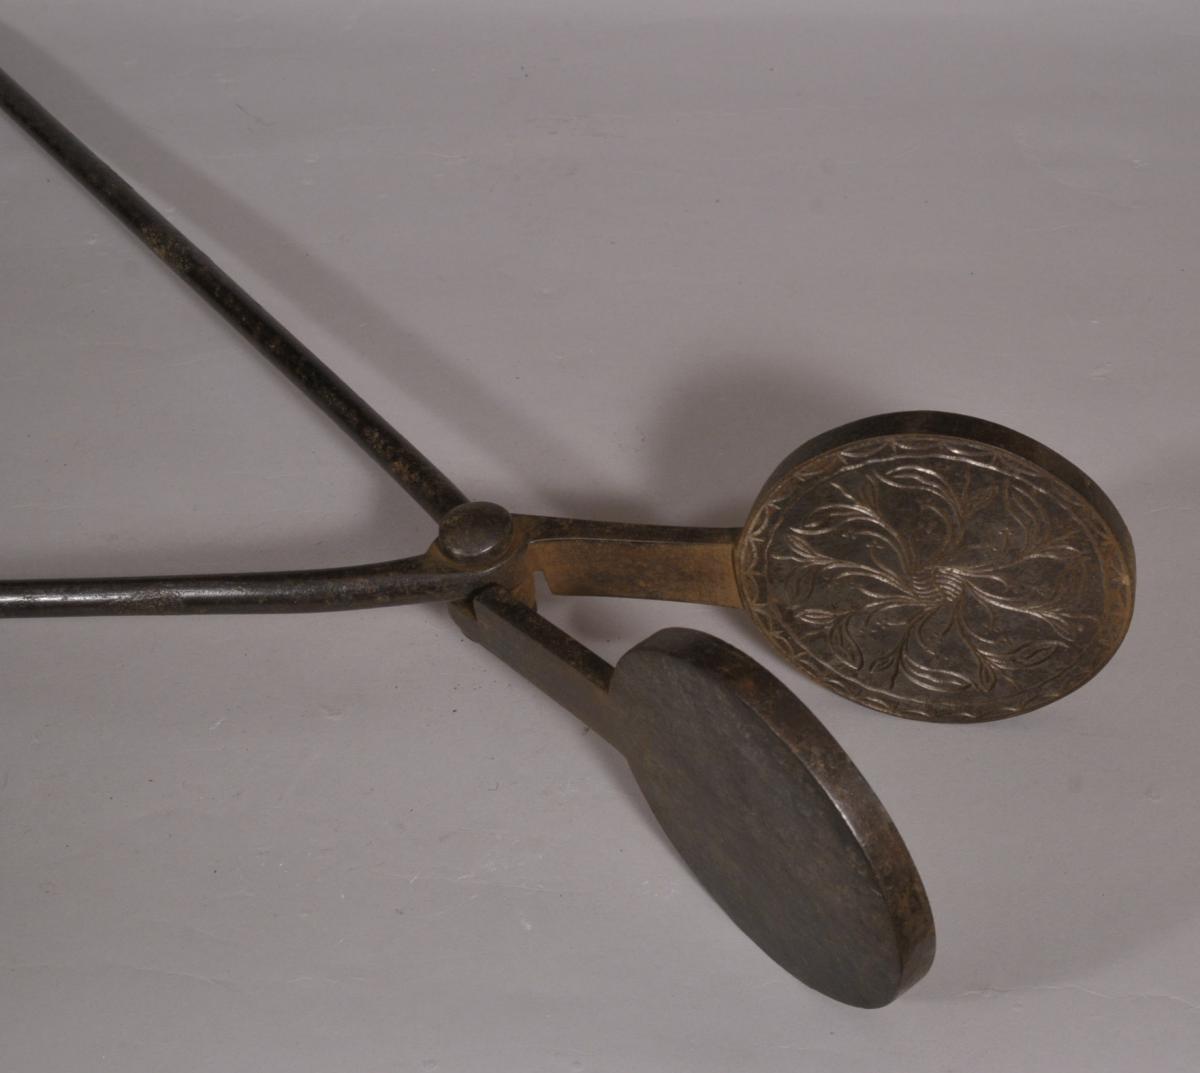 S/4308 Antique Wafering Iron of the Late Georgian Period